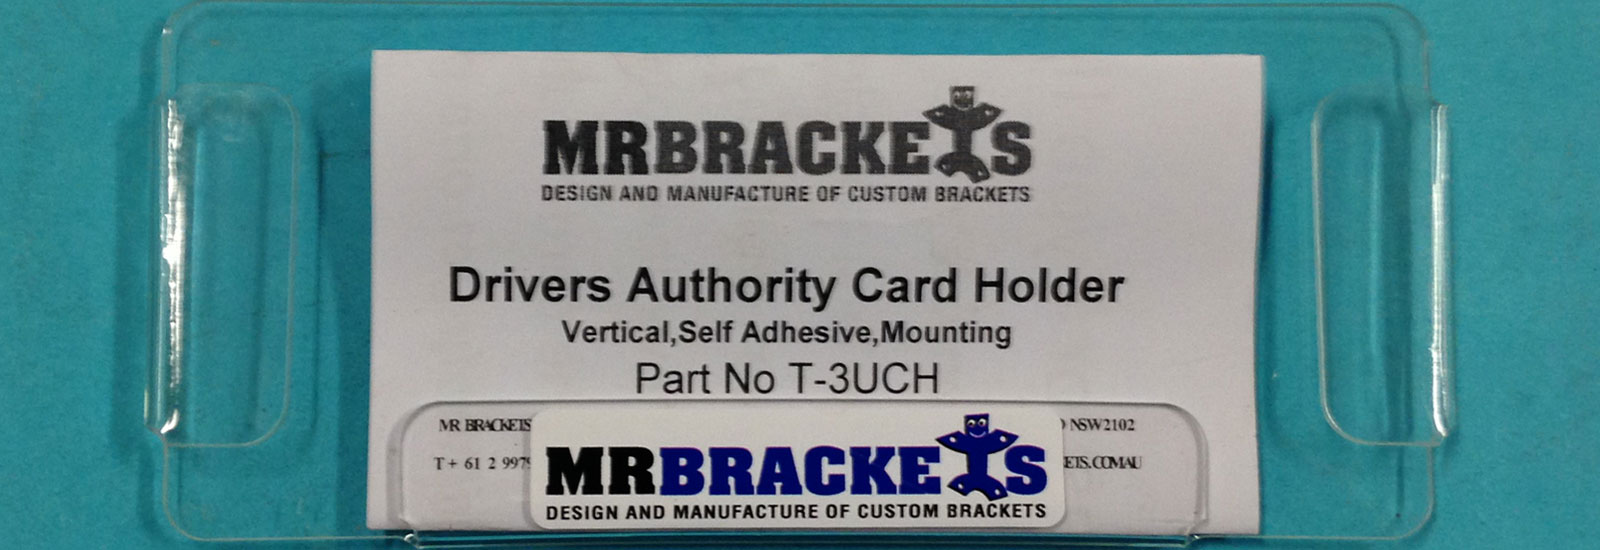 Windscreen Mounting Drivers Authority Card Holder